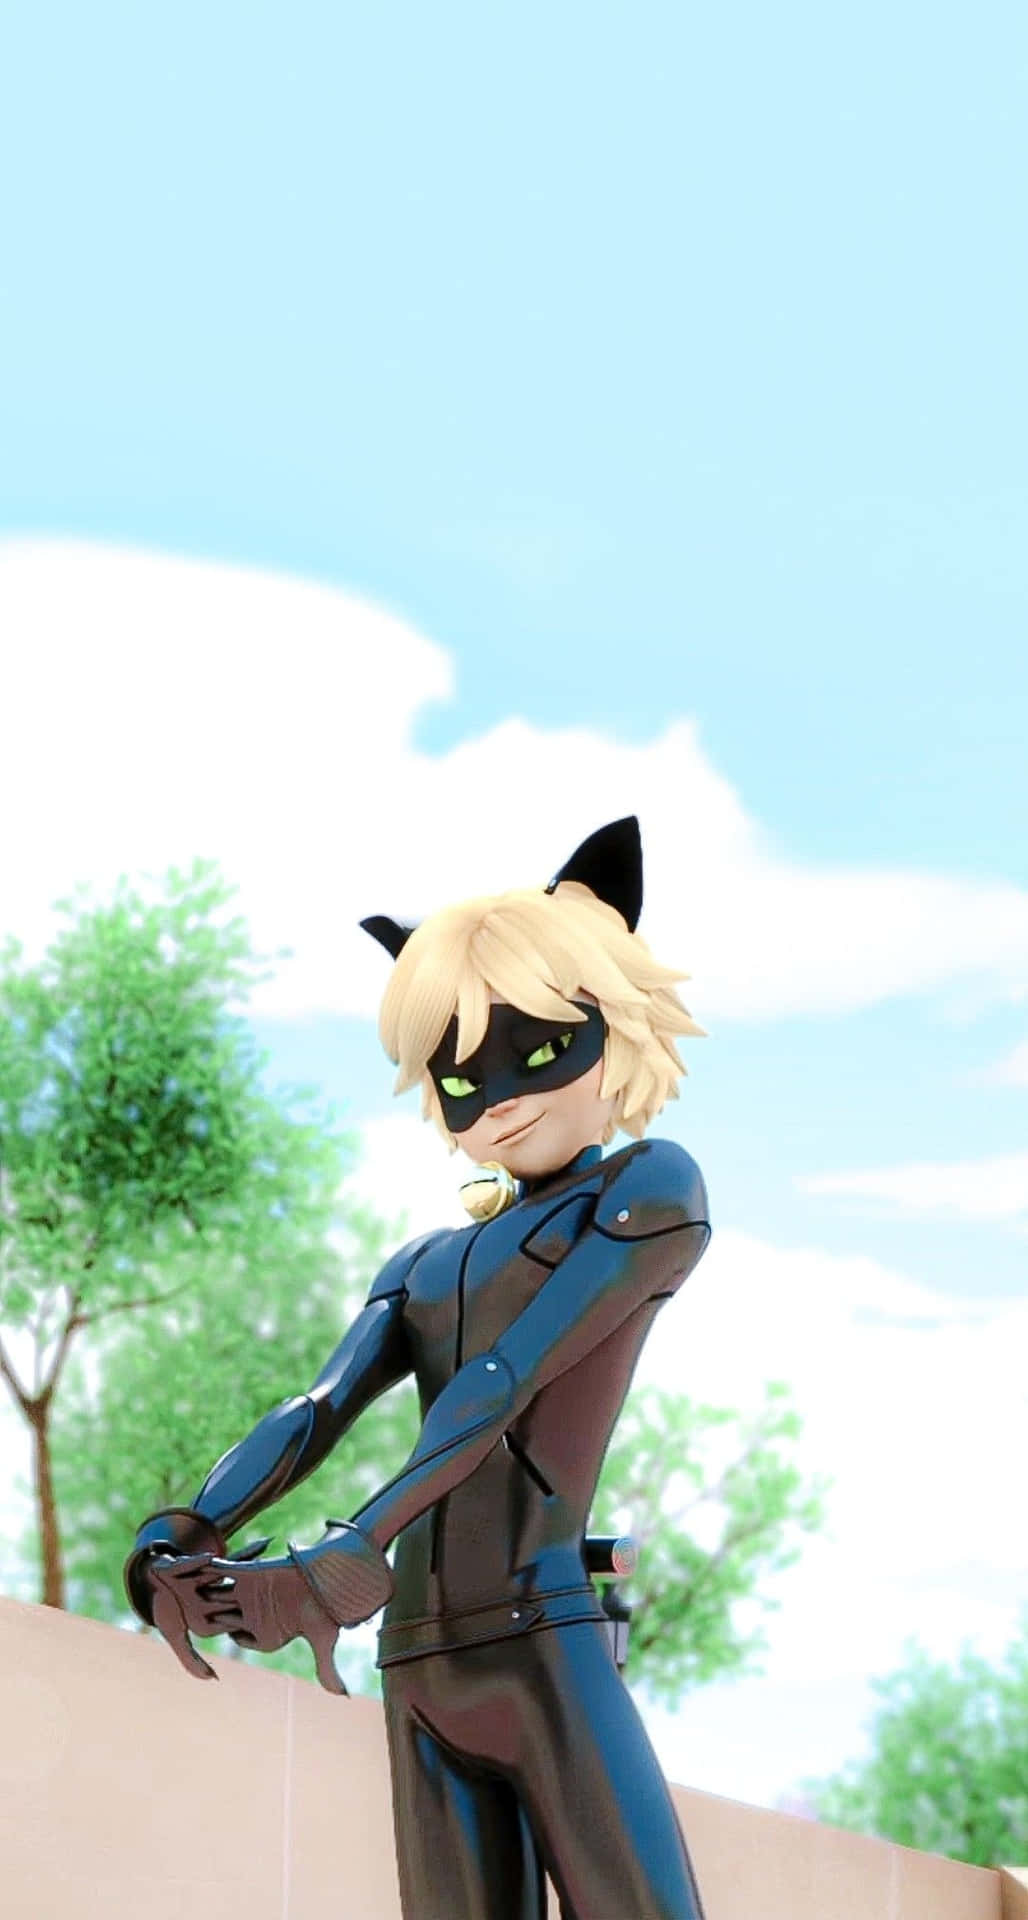 Black Cat, Does It Offer Good Luck Or Misfortune? Background